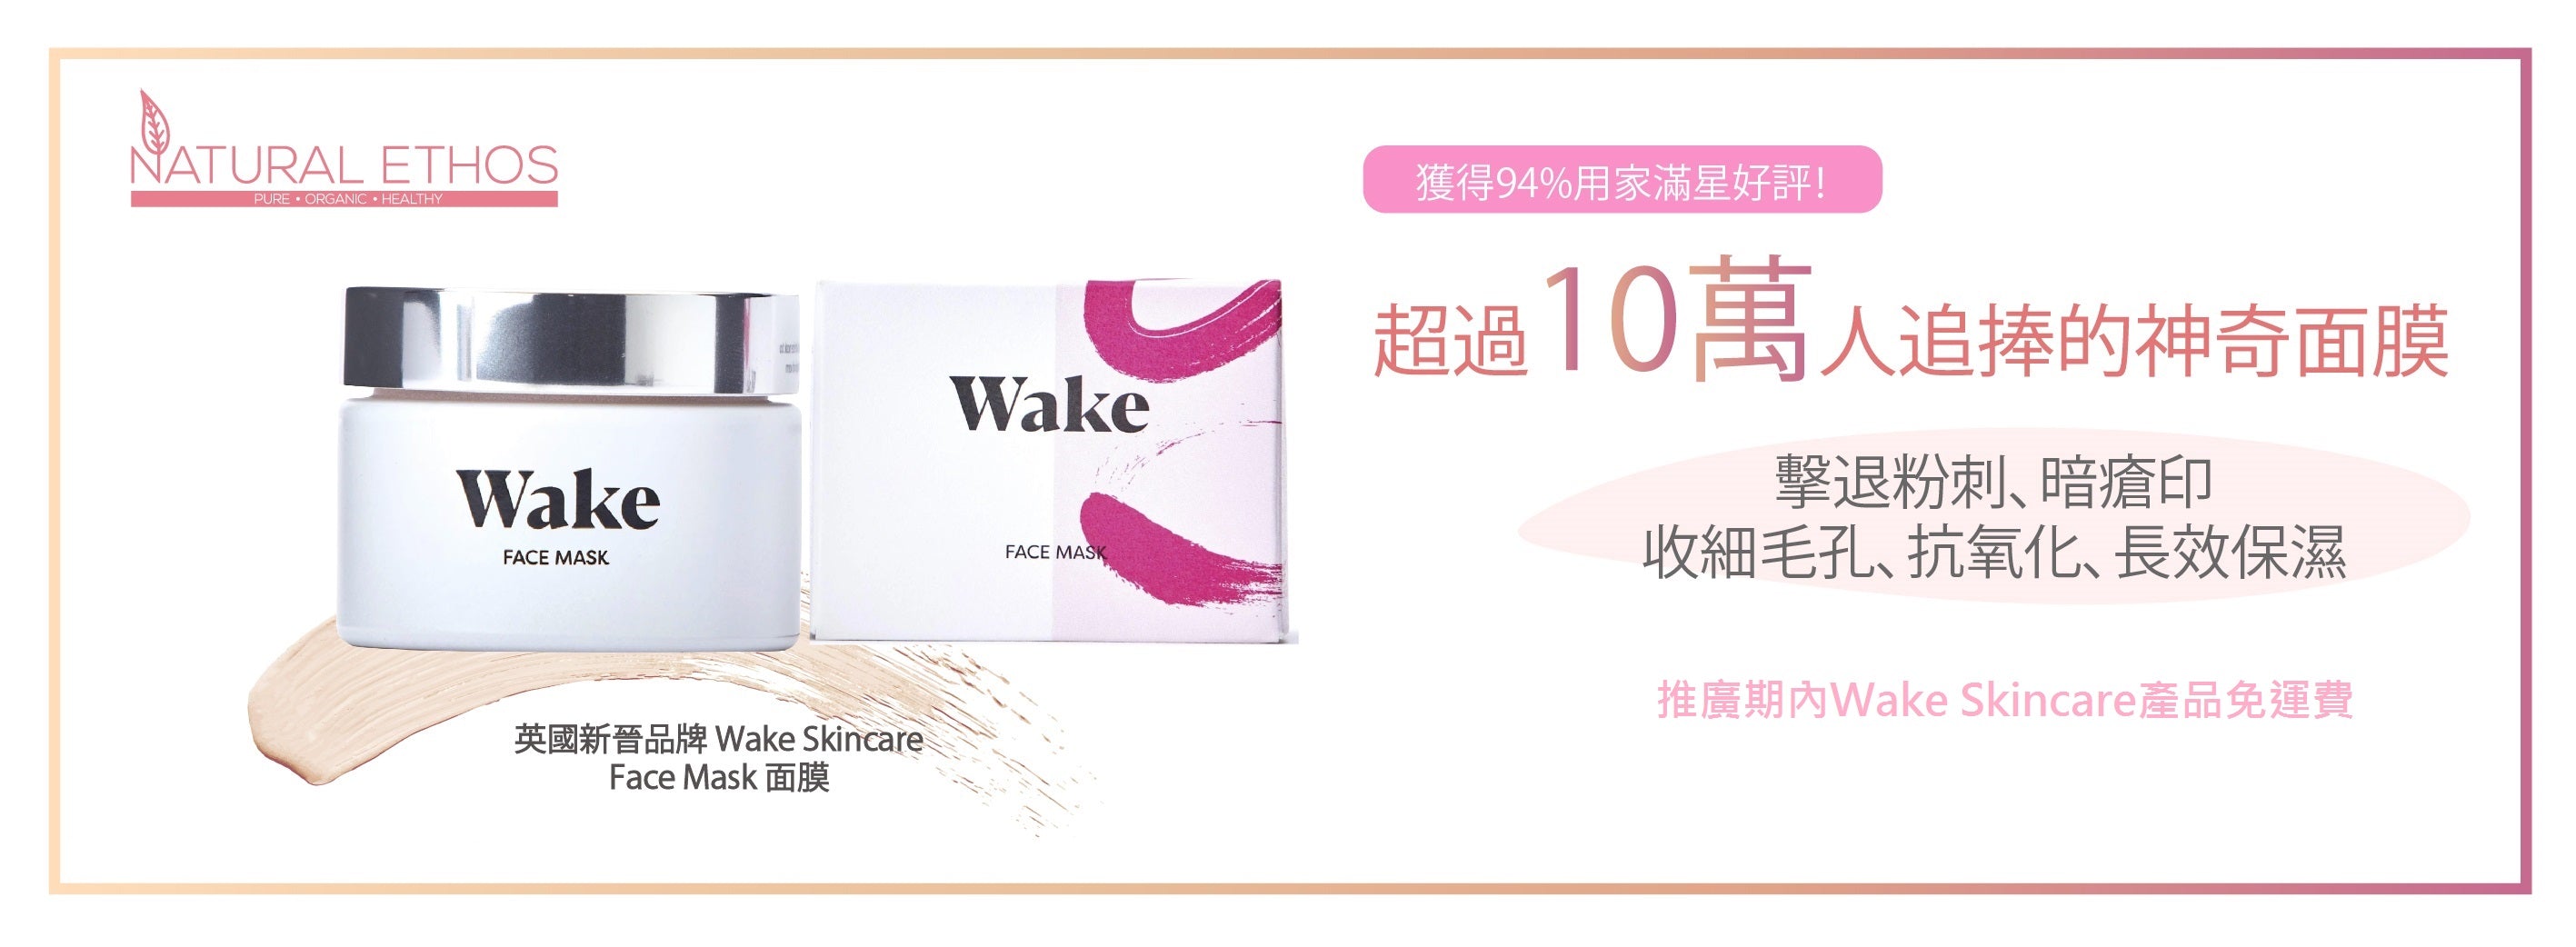 Wake Skincare Face Mask marketing banner collection